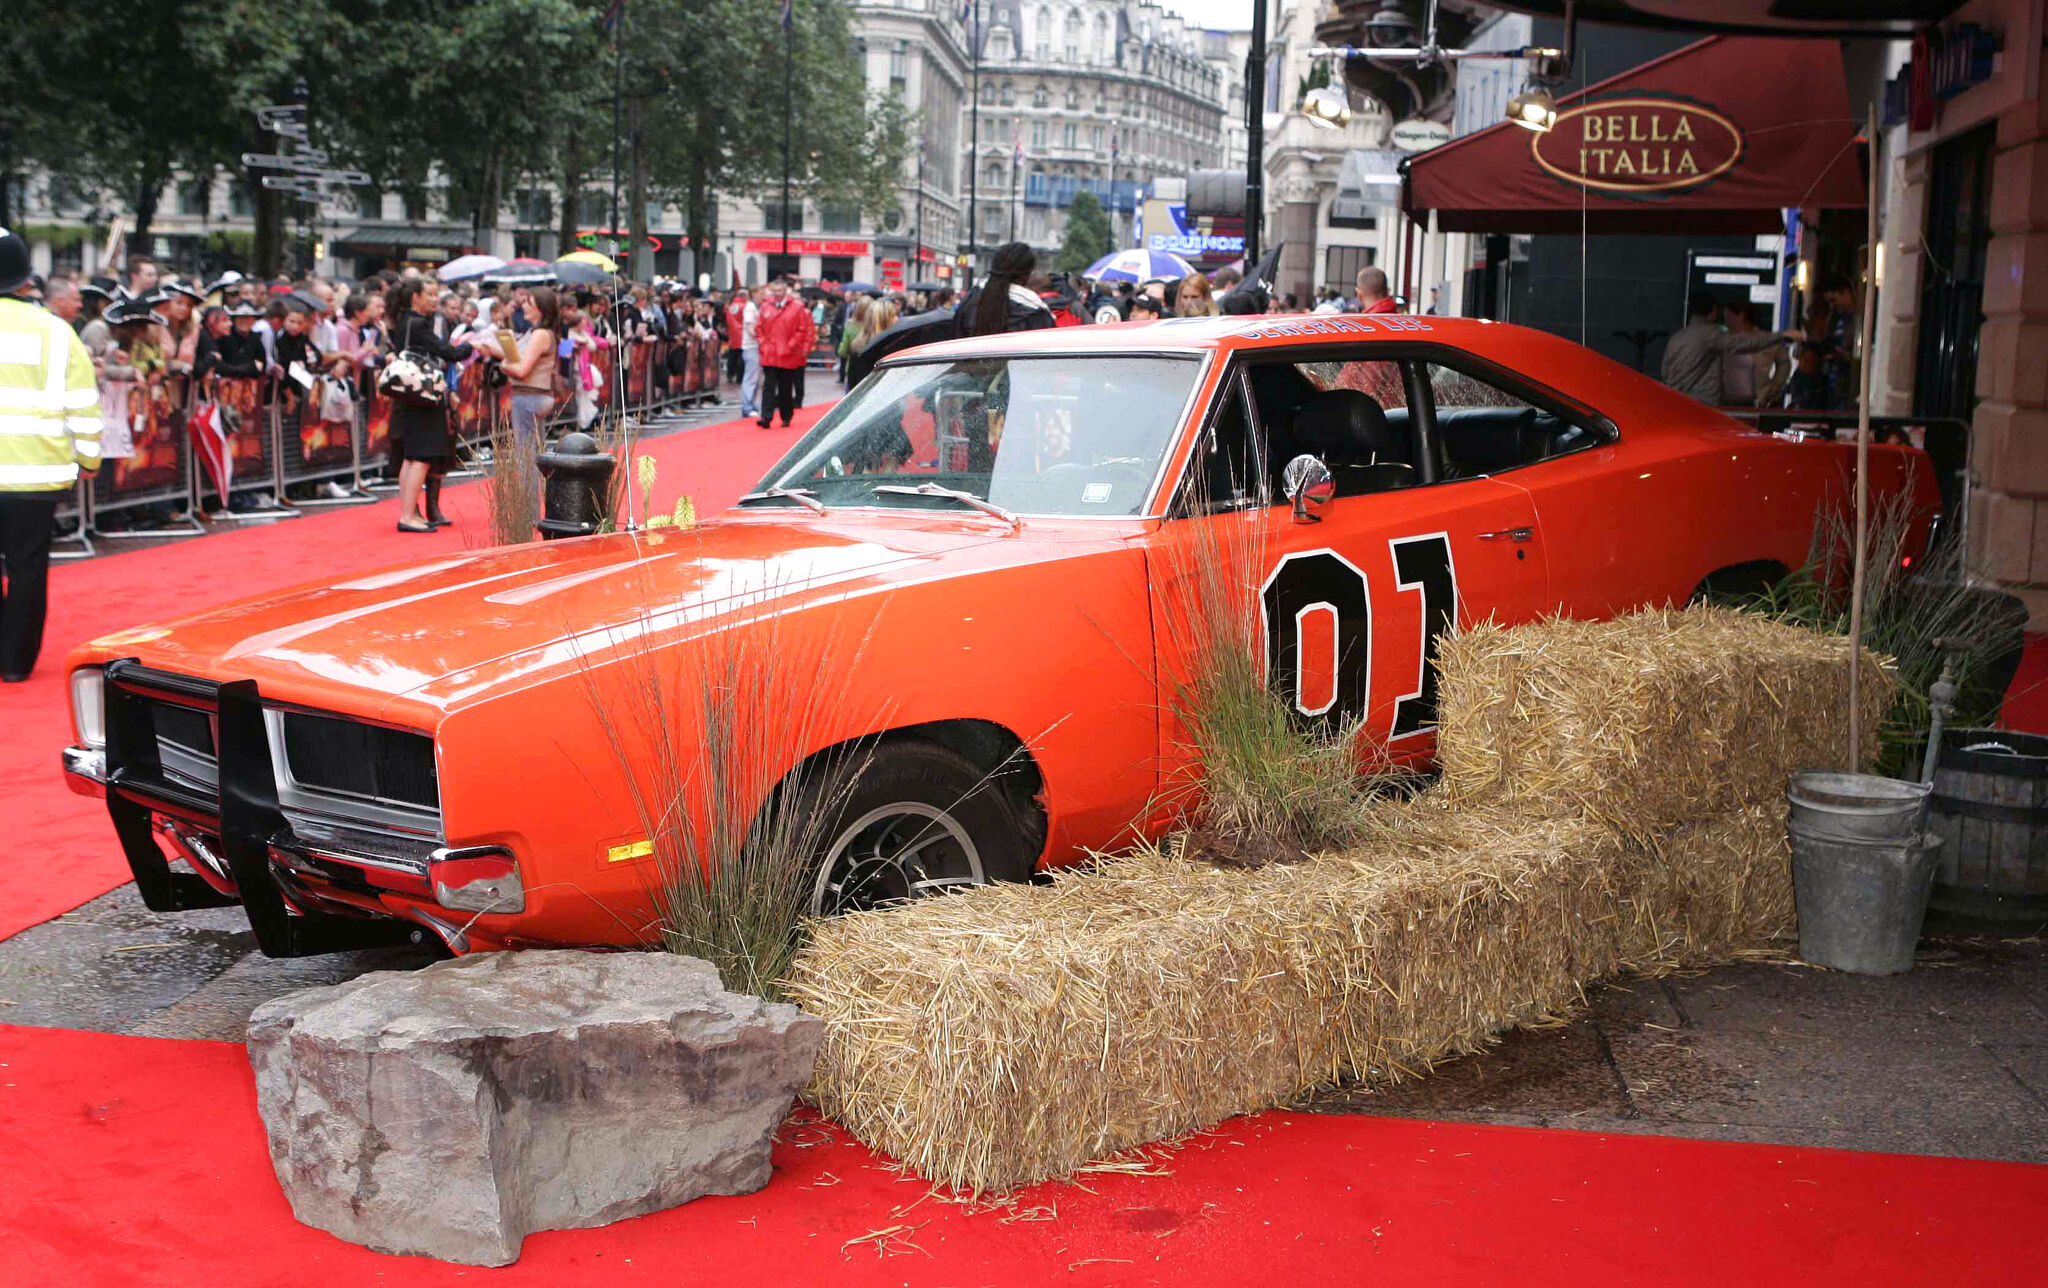 1969 Dodge Charger 'General Lee' Wrecked After 'Traveling Too Fast' in  Missouri